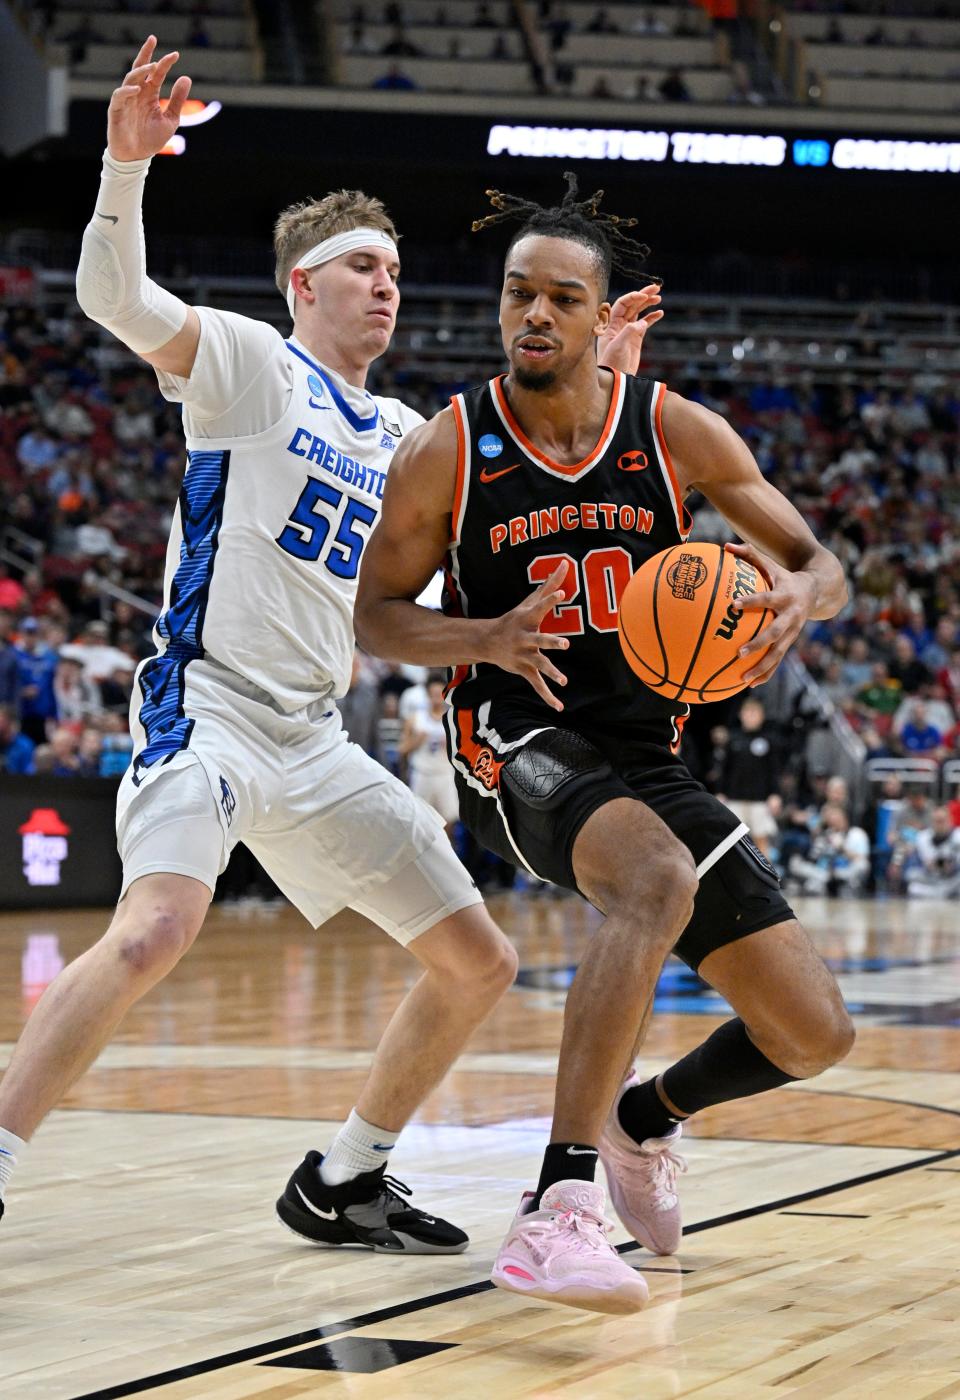 Mar 24, 2023; Louisville, KY, USA; Princeton Tigers forward Tosan Evbuomwan (20) dribbles against Creighton Bluejays guard Baylor Scheierman (55) during the second half of the NCAA tournament round of sixteen at KFC YUM! Center.